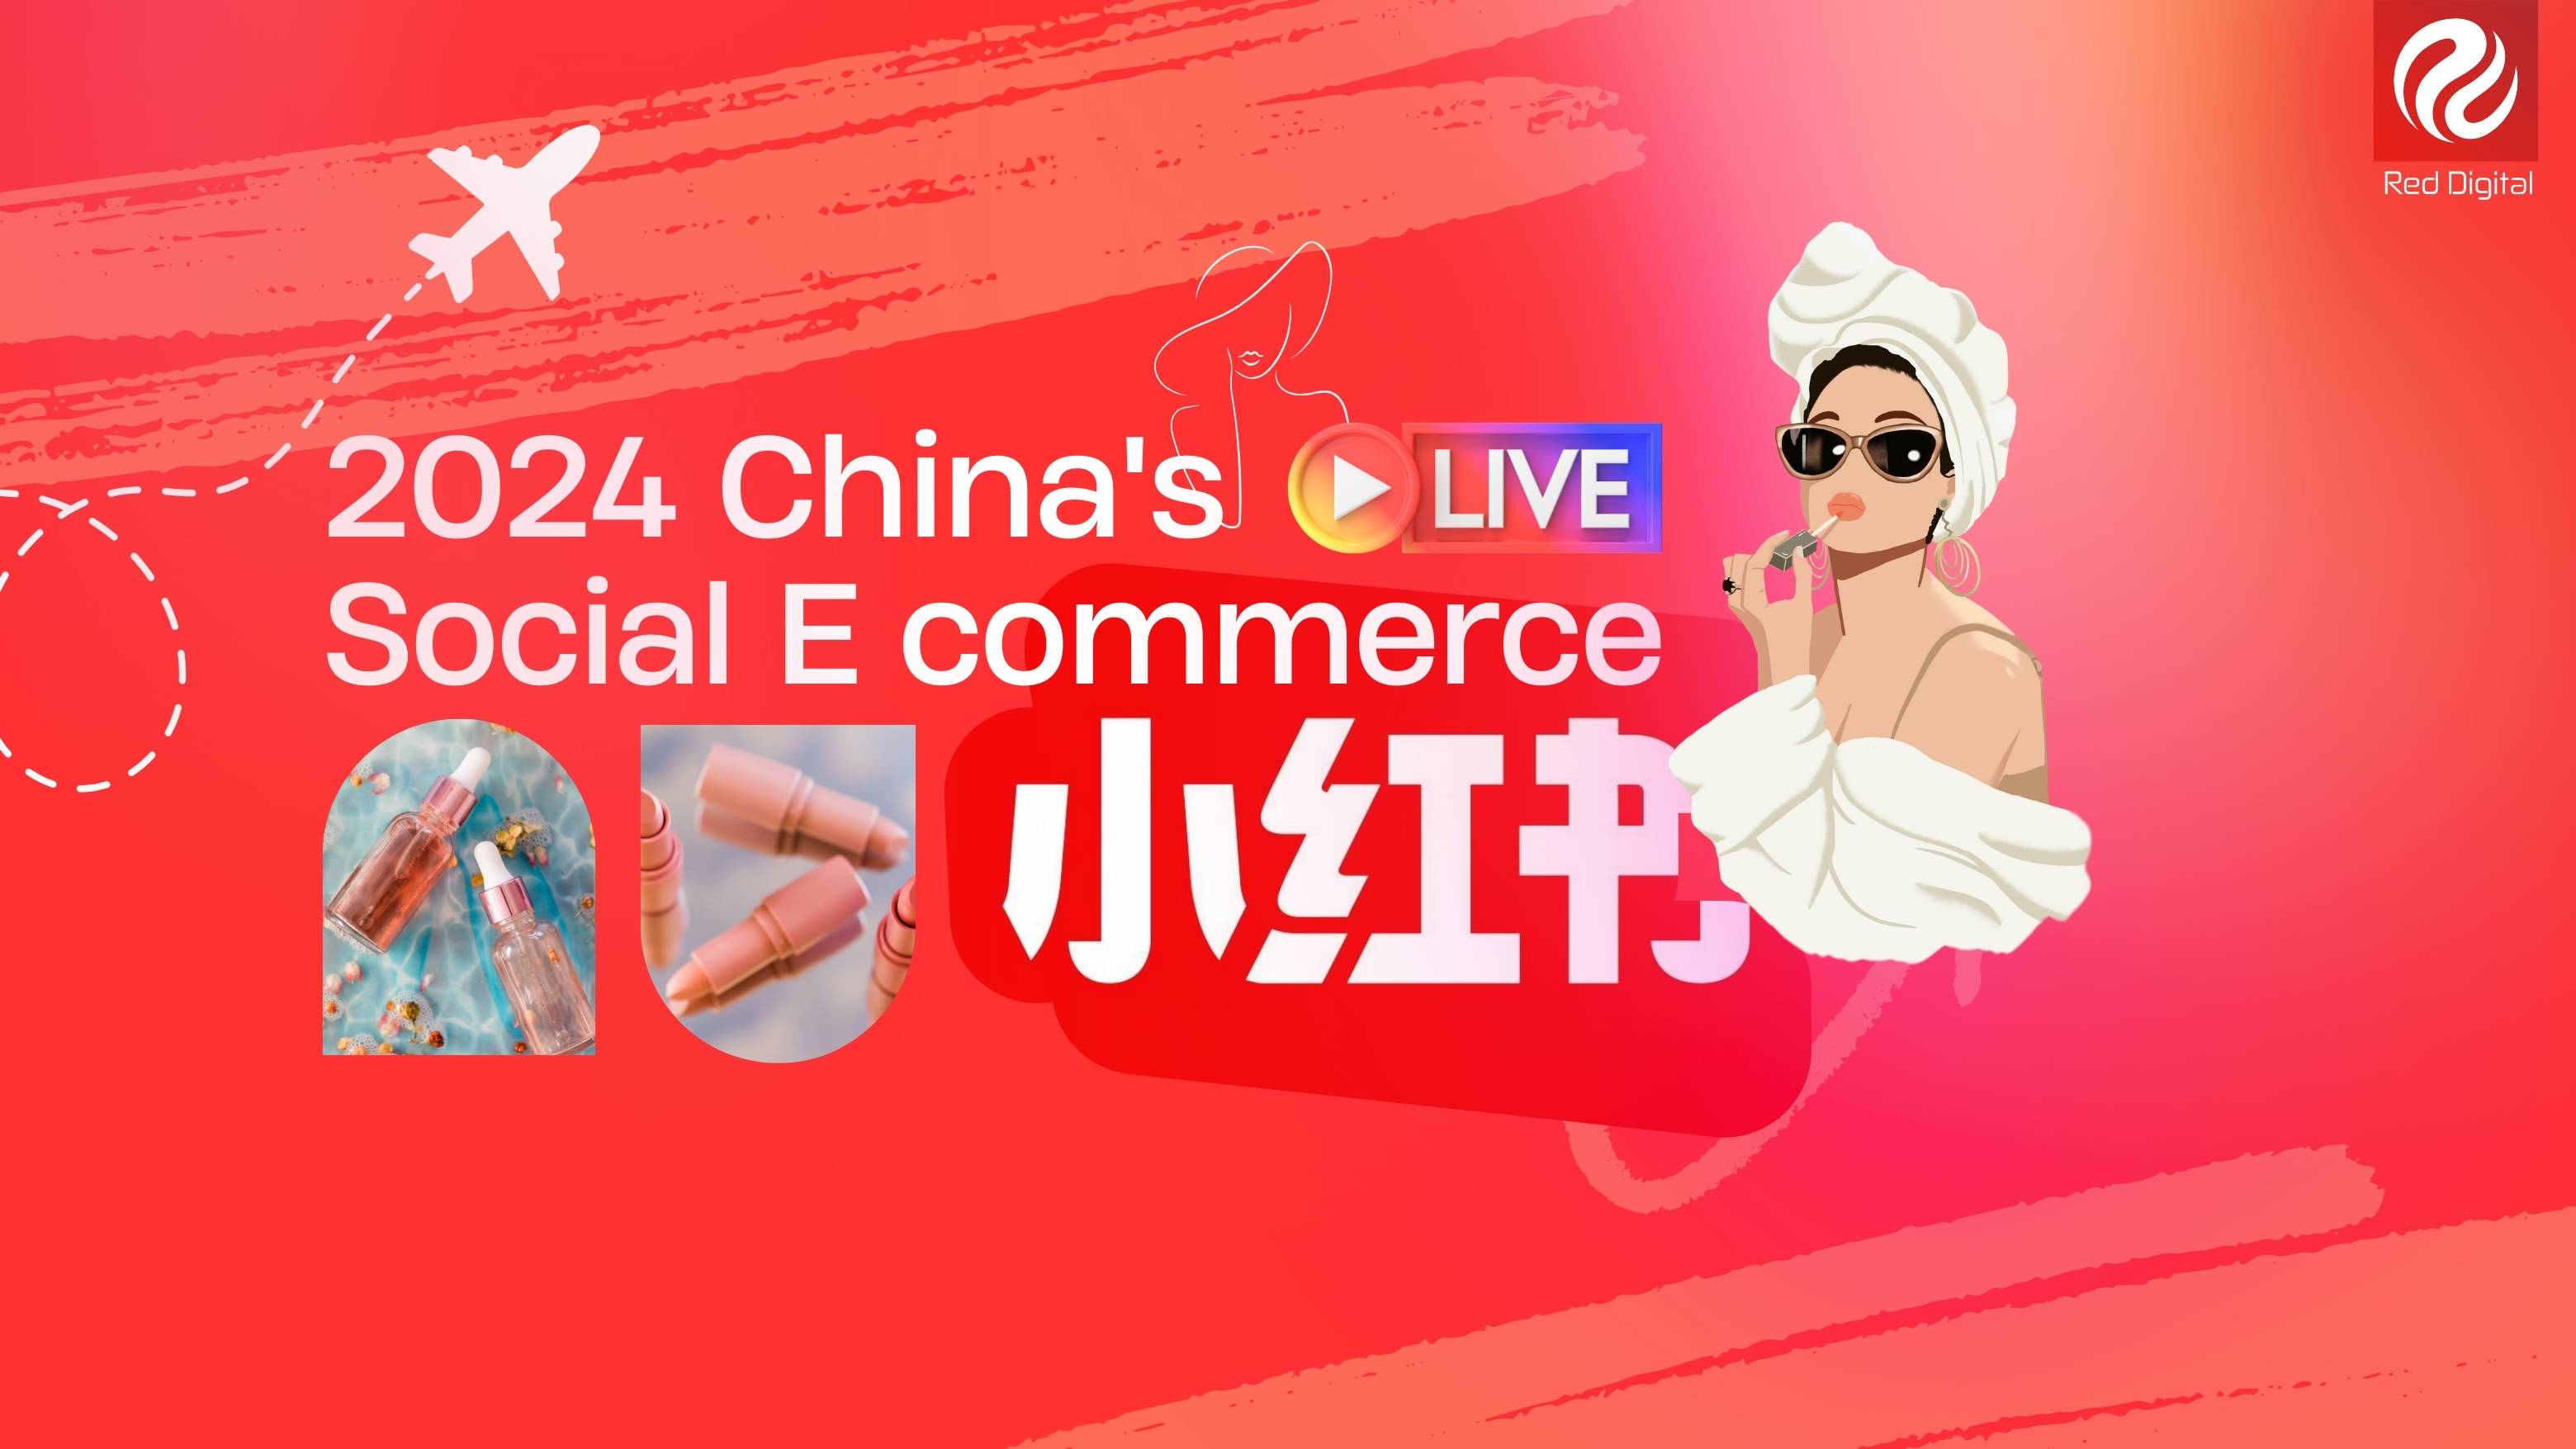 2024 China's Social E-commerce: Leverage these 6 key strategies to create Little Red Book success in 2024 hero image